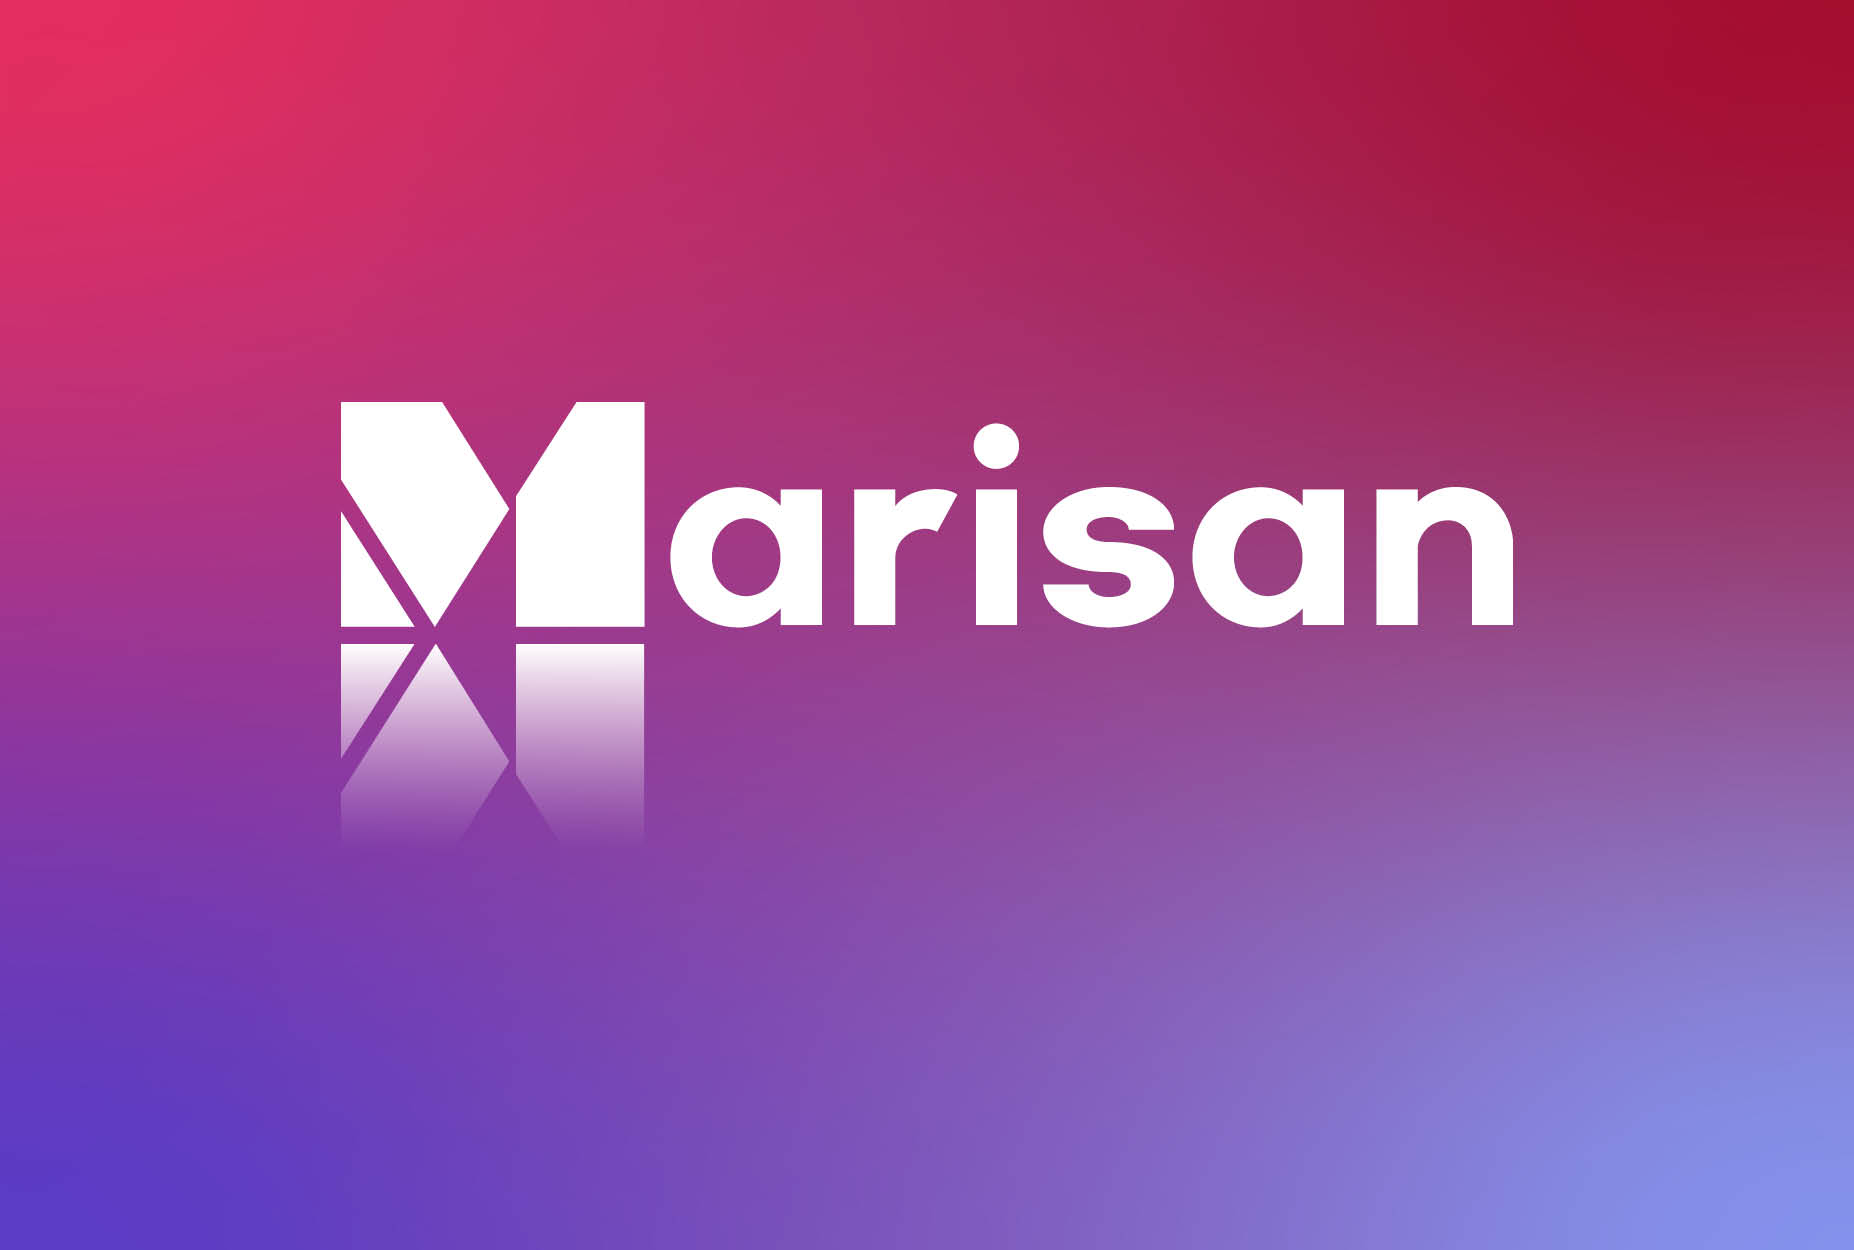 Welcome to the new Marisan: renewed, refreshed and ready for the future!